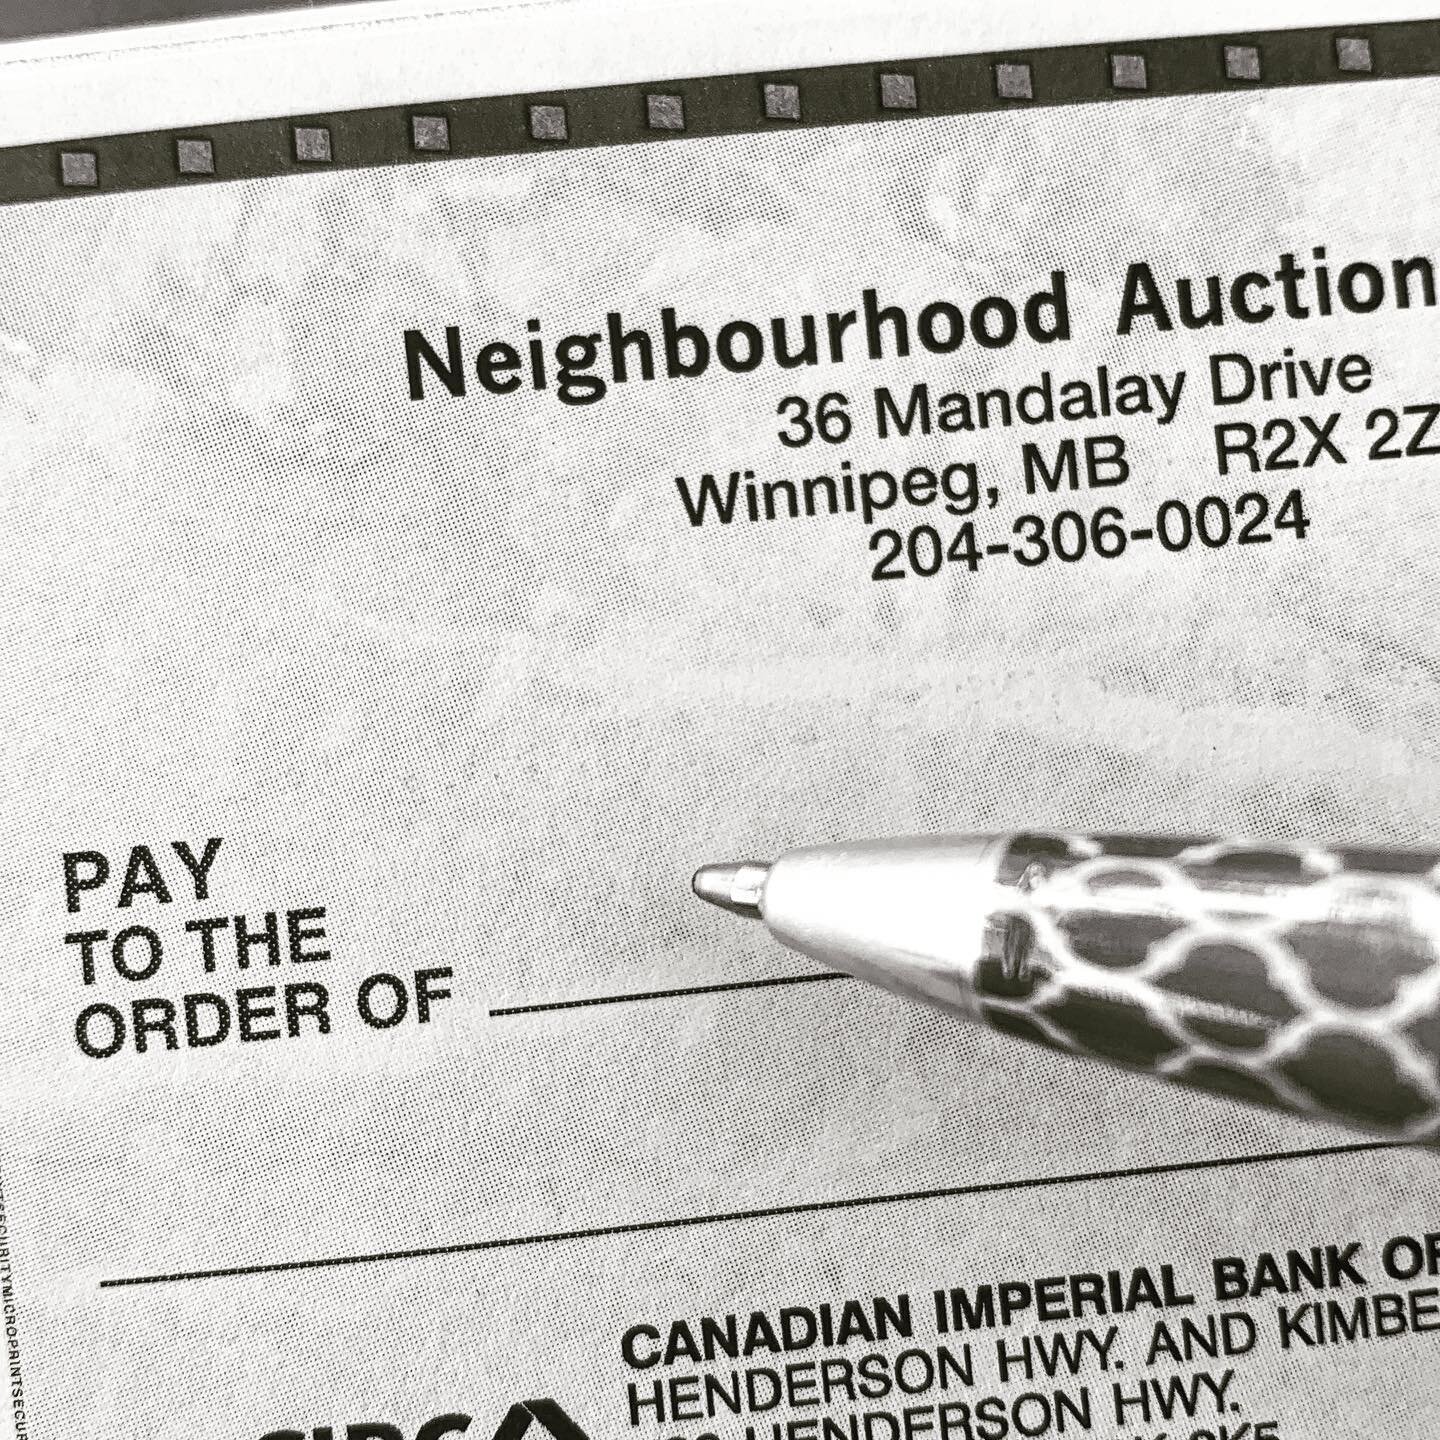 It&rsquo;s payday at Neighbourhood Auctions. Do you want to be part of our weekly payouts? Consignment is quick and easy! Follow the link in our bio to learn more. #winnipegsmallbusiness #winnipegauction #shopsmallwinnipeg #auctionhouse